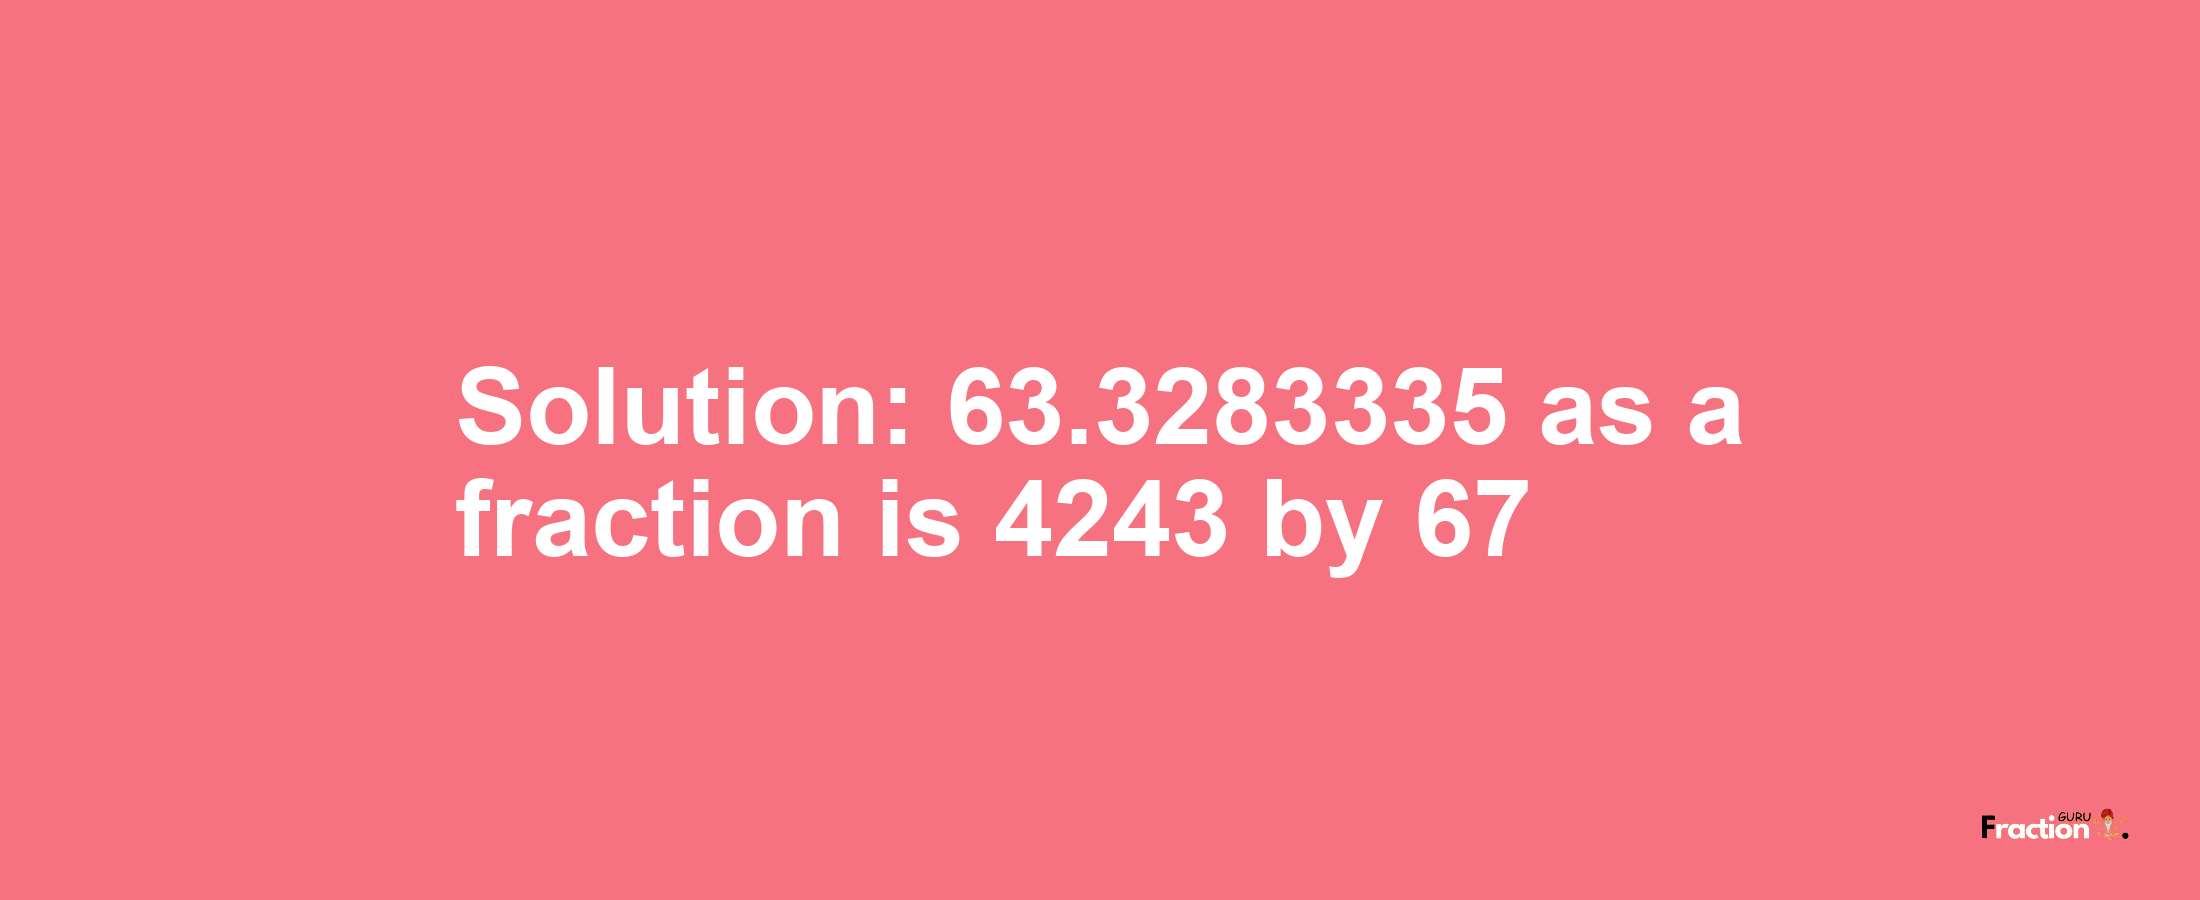 Solution:63.3283335 as a fraction is 4243/67